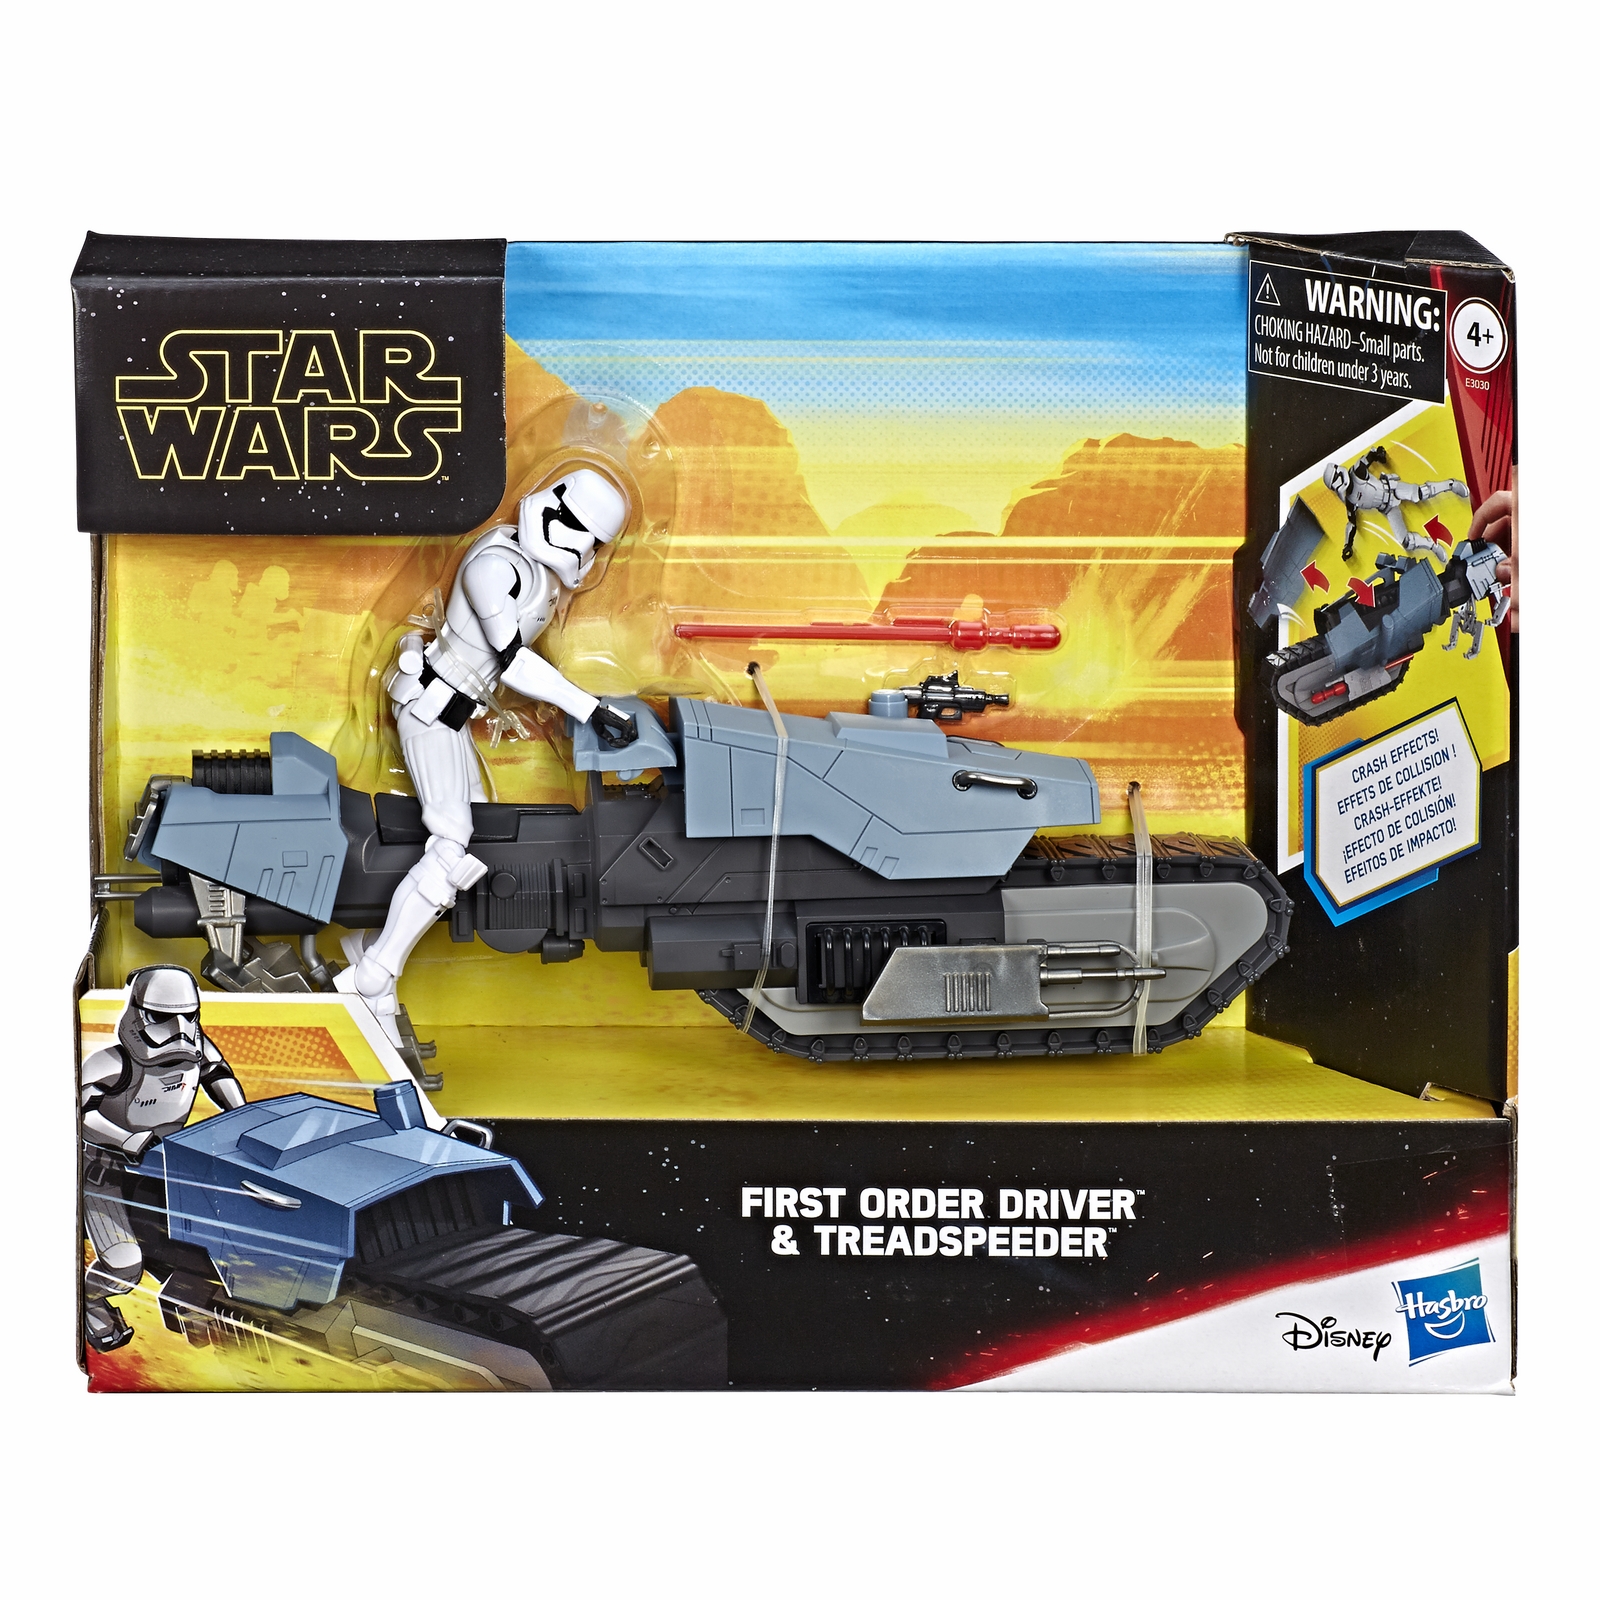 STAR WARS GALAXY OF ADVENTURES FIRST ORDER DRIVER AND TREADSPEEDER - in pck.jpg